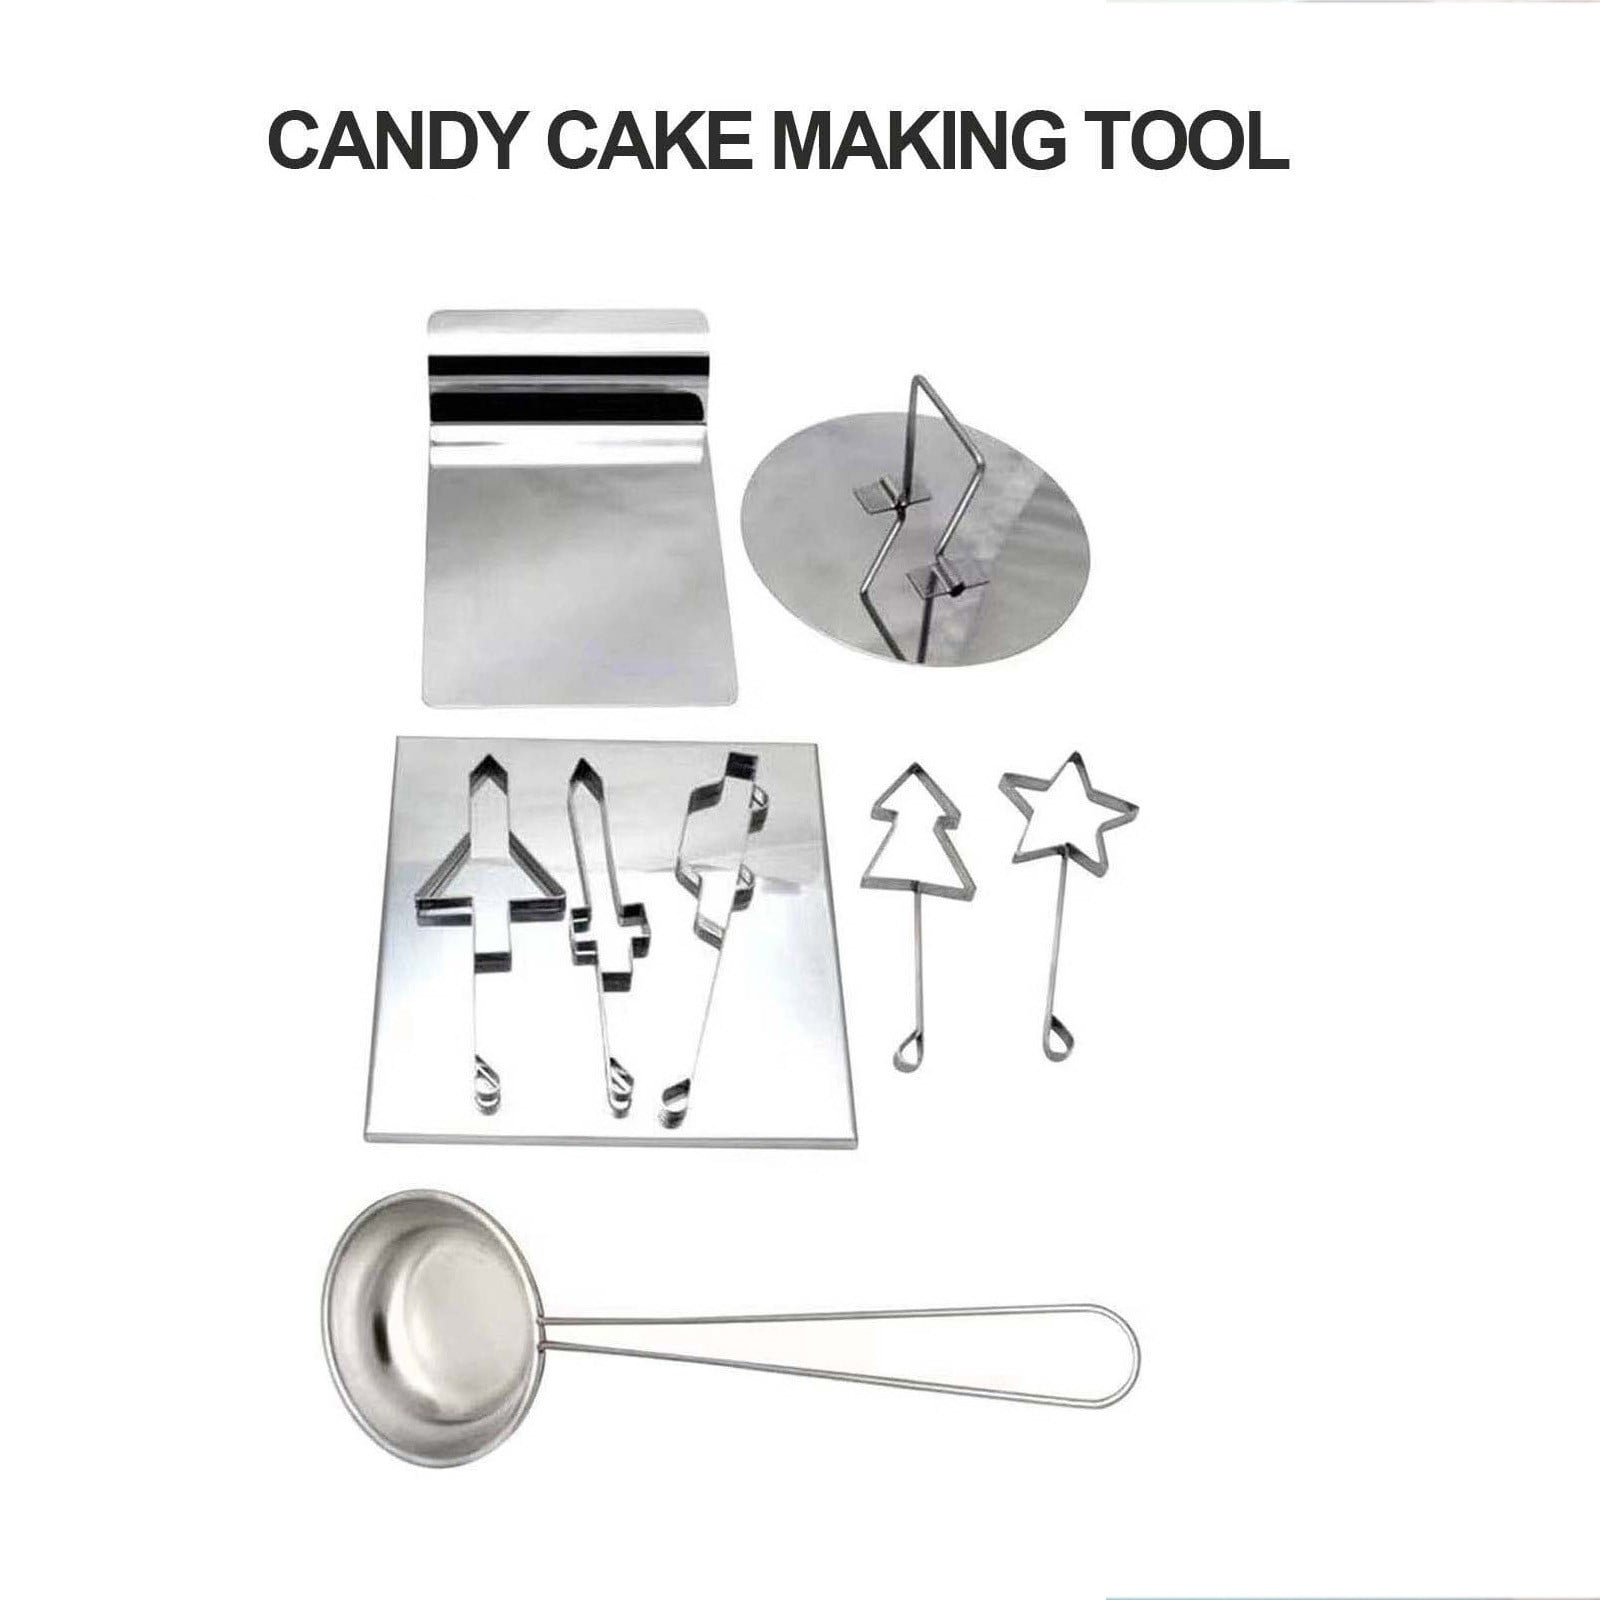 Stainless Cutters Sugar Candy Making Tools Set For Festivals And Daily